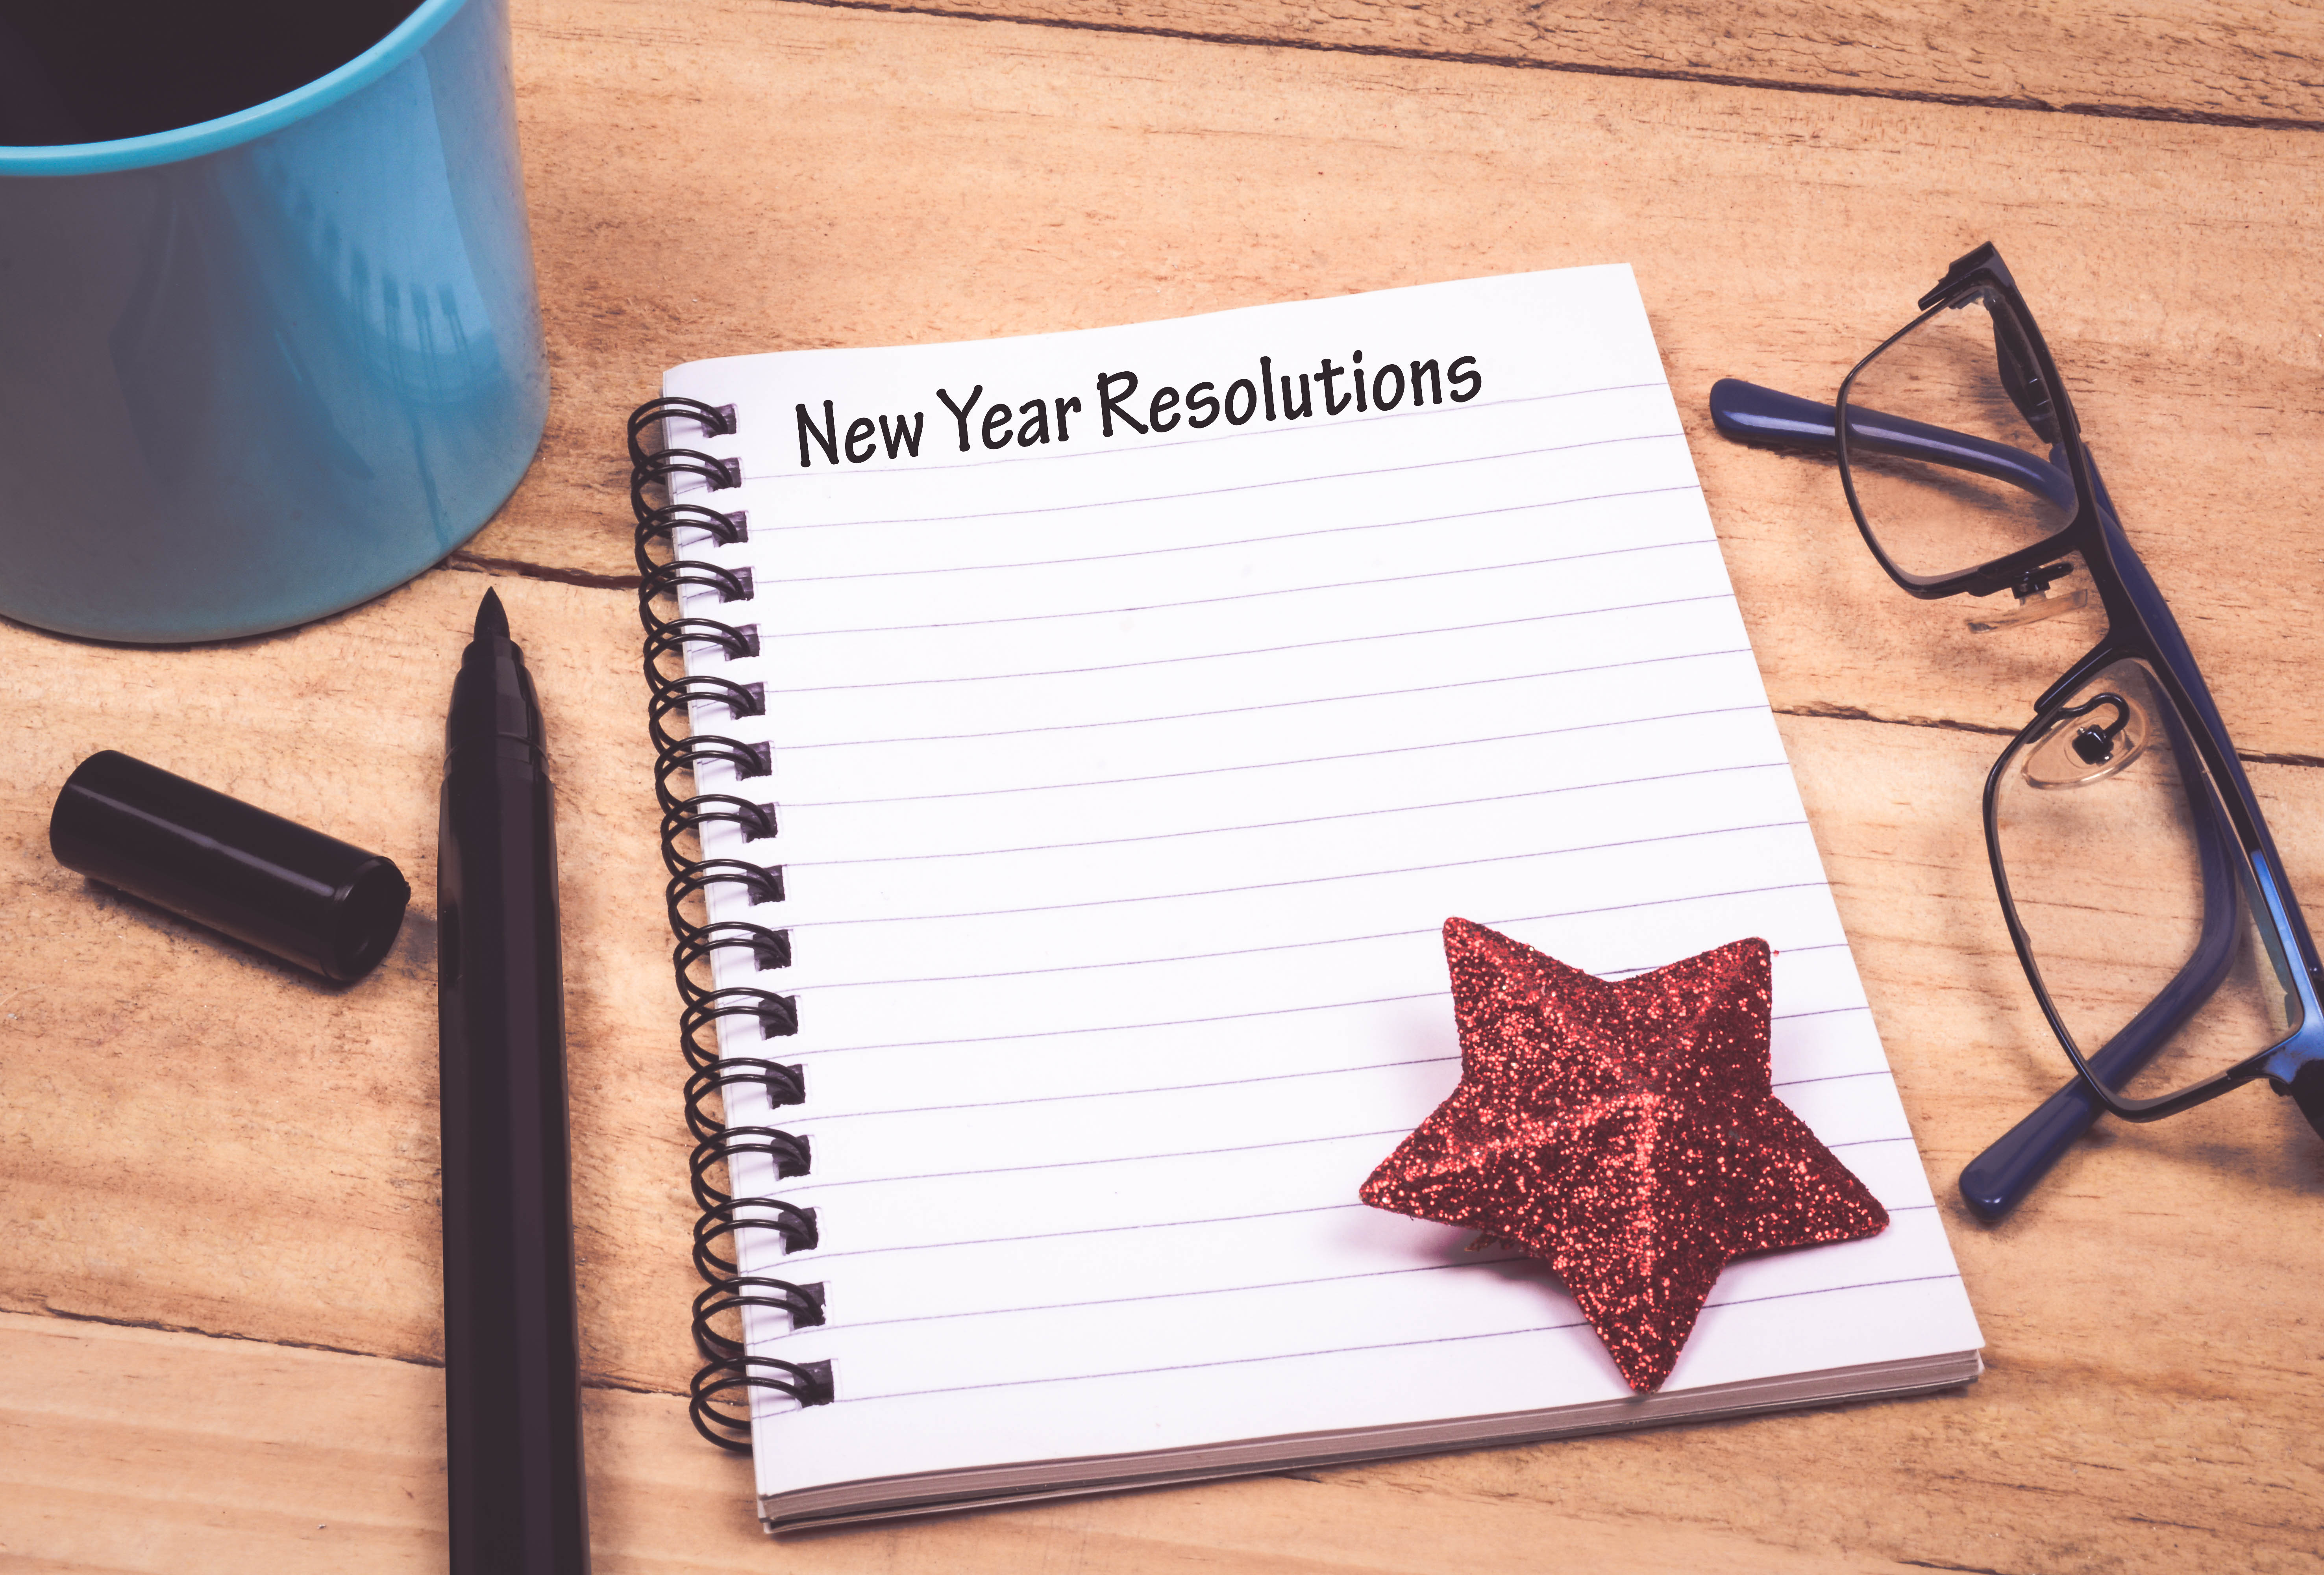 New Year’s Resolutions? Let Hames Homes help